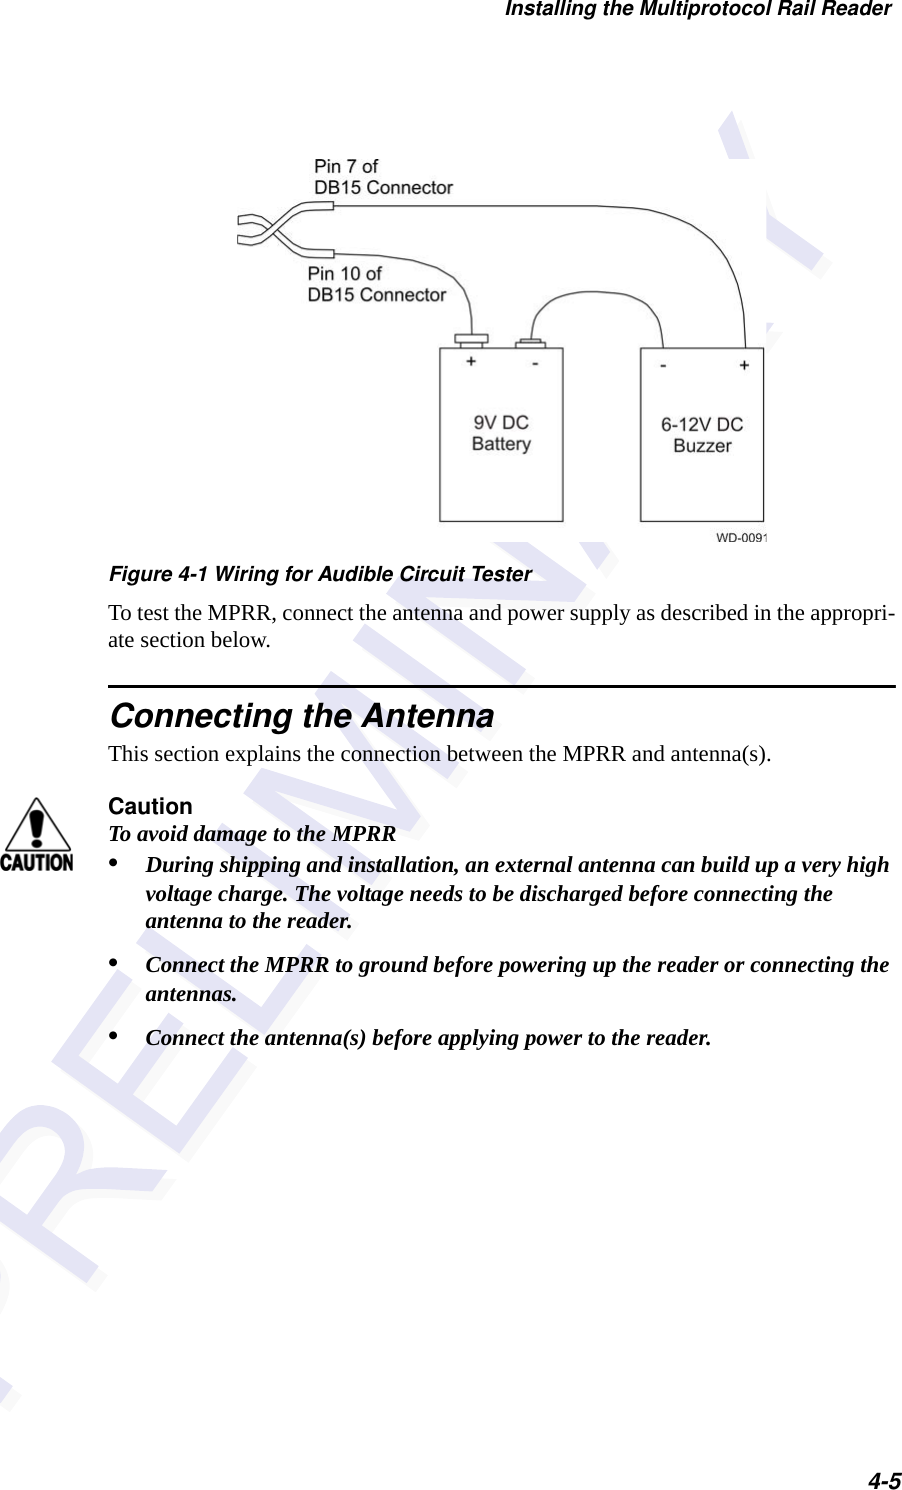 Installing the Multiprotocol Rail Reader4-5 Figure 4-1 Wiring for Audible Circuit TesterTo test the MPRR, connect the antenna and power supply as described in the appropri-ate section below.Connecting the AntennaThis section explains the connection between the MPRR and antenna(s).CautionTo avoid damage to the MPRR•During shipping and installation, an external antenna can build up a very high voltage charge. The voltage needs to be discharged before connecting the antenna to the reader.•Connect the MPRR to ground before powering up the reader or connecting the antennas.•Connect the antenna(s) before applying power to the reader.